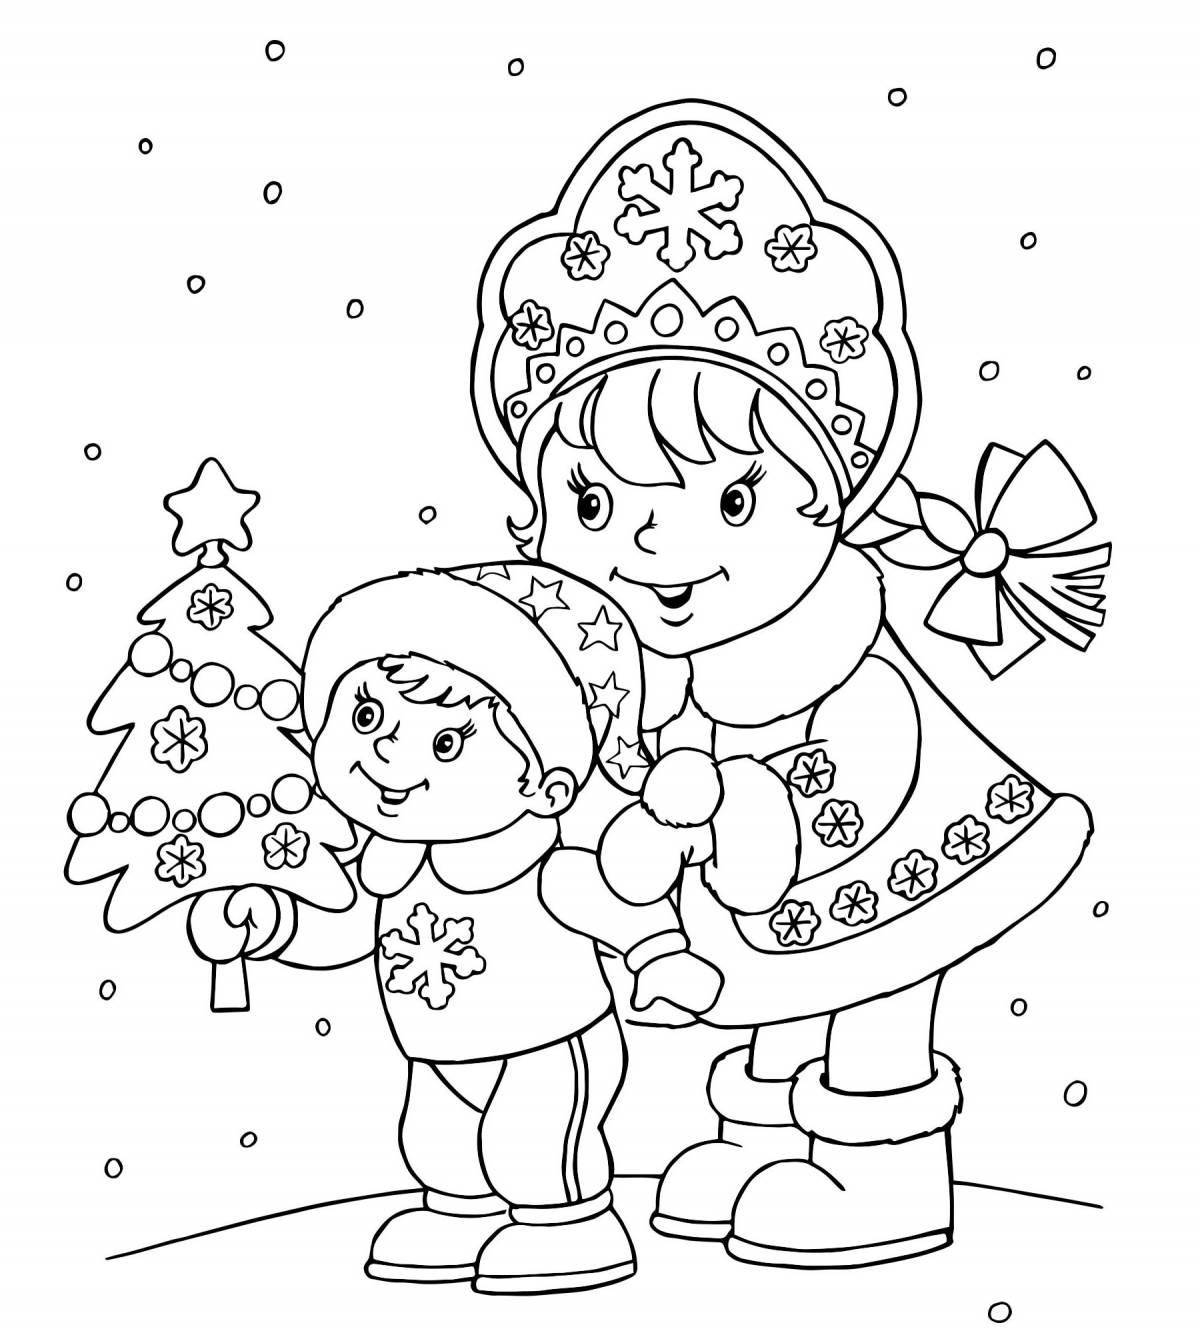 Playful coloring of the snow maiden for children